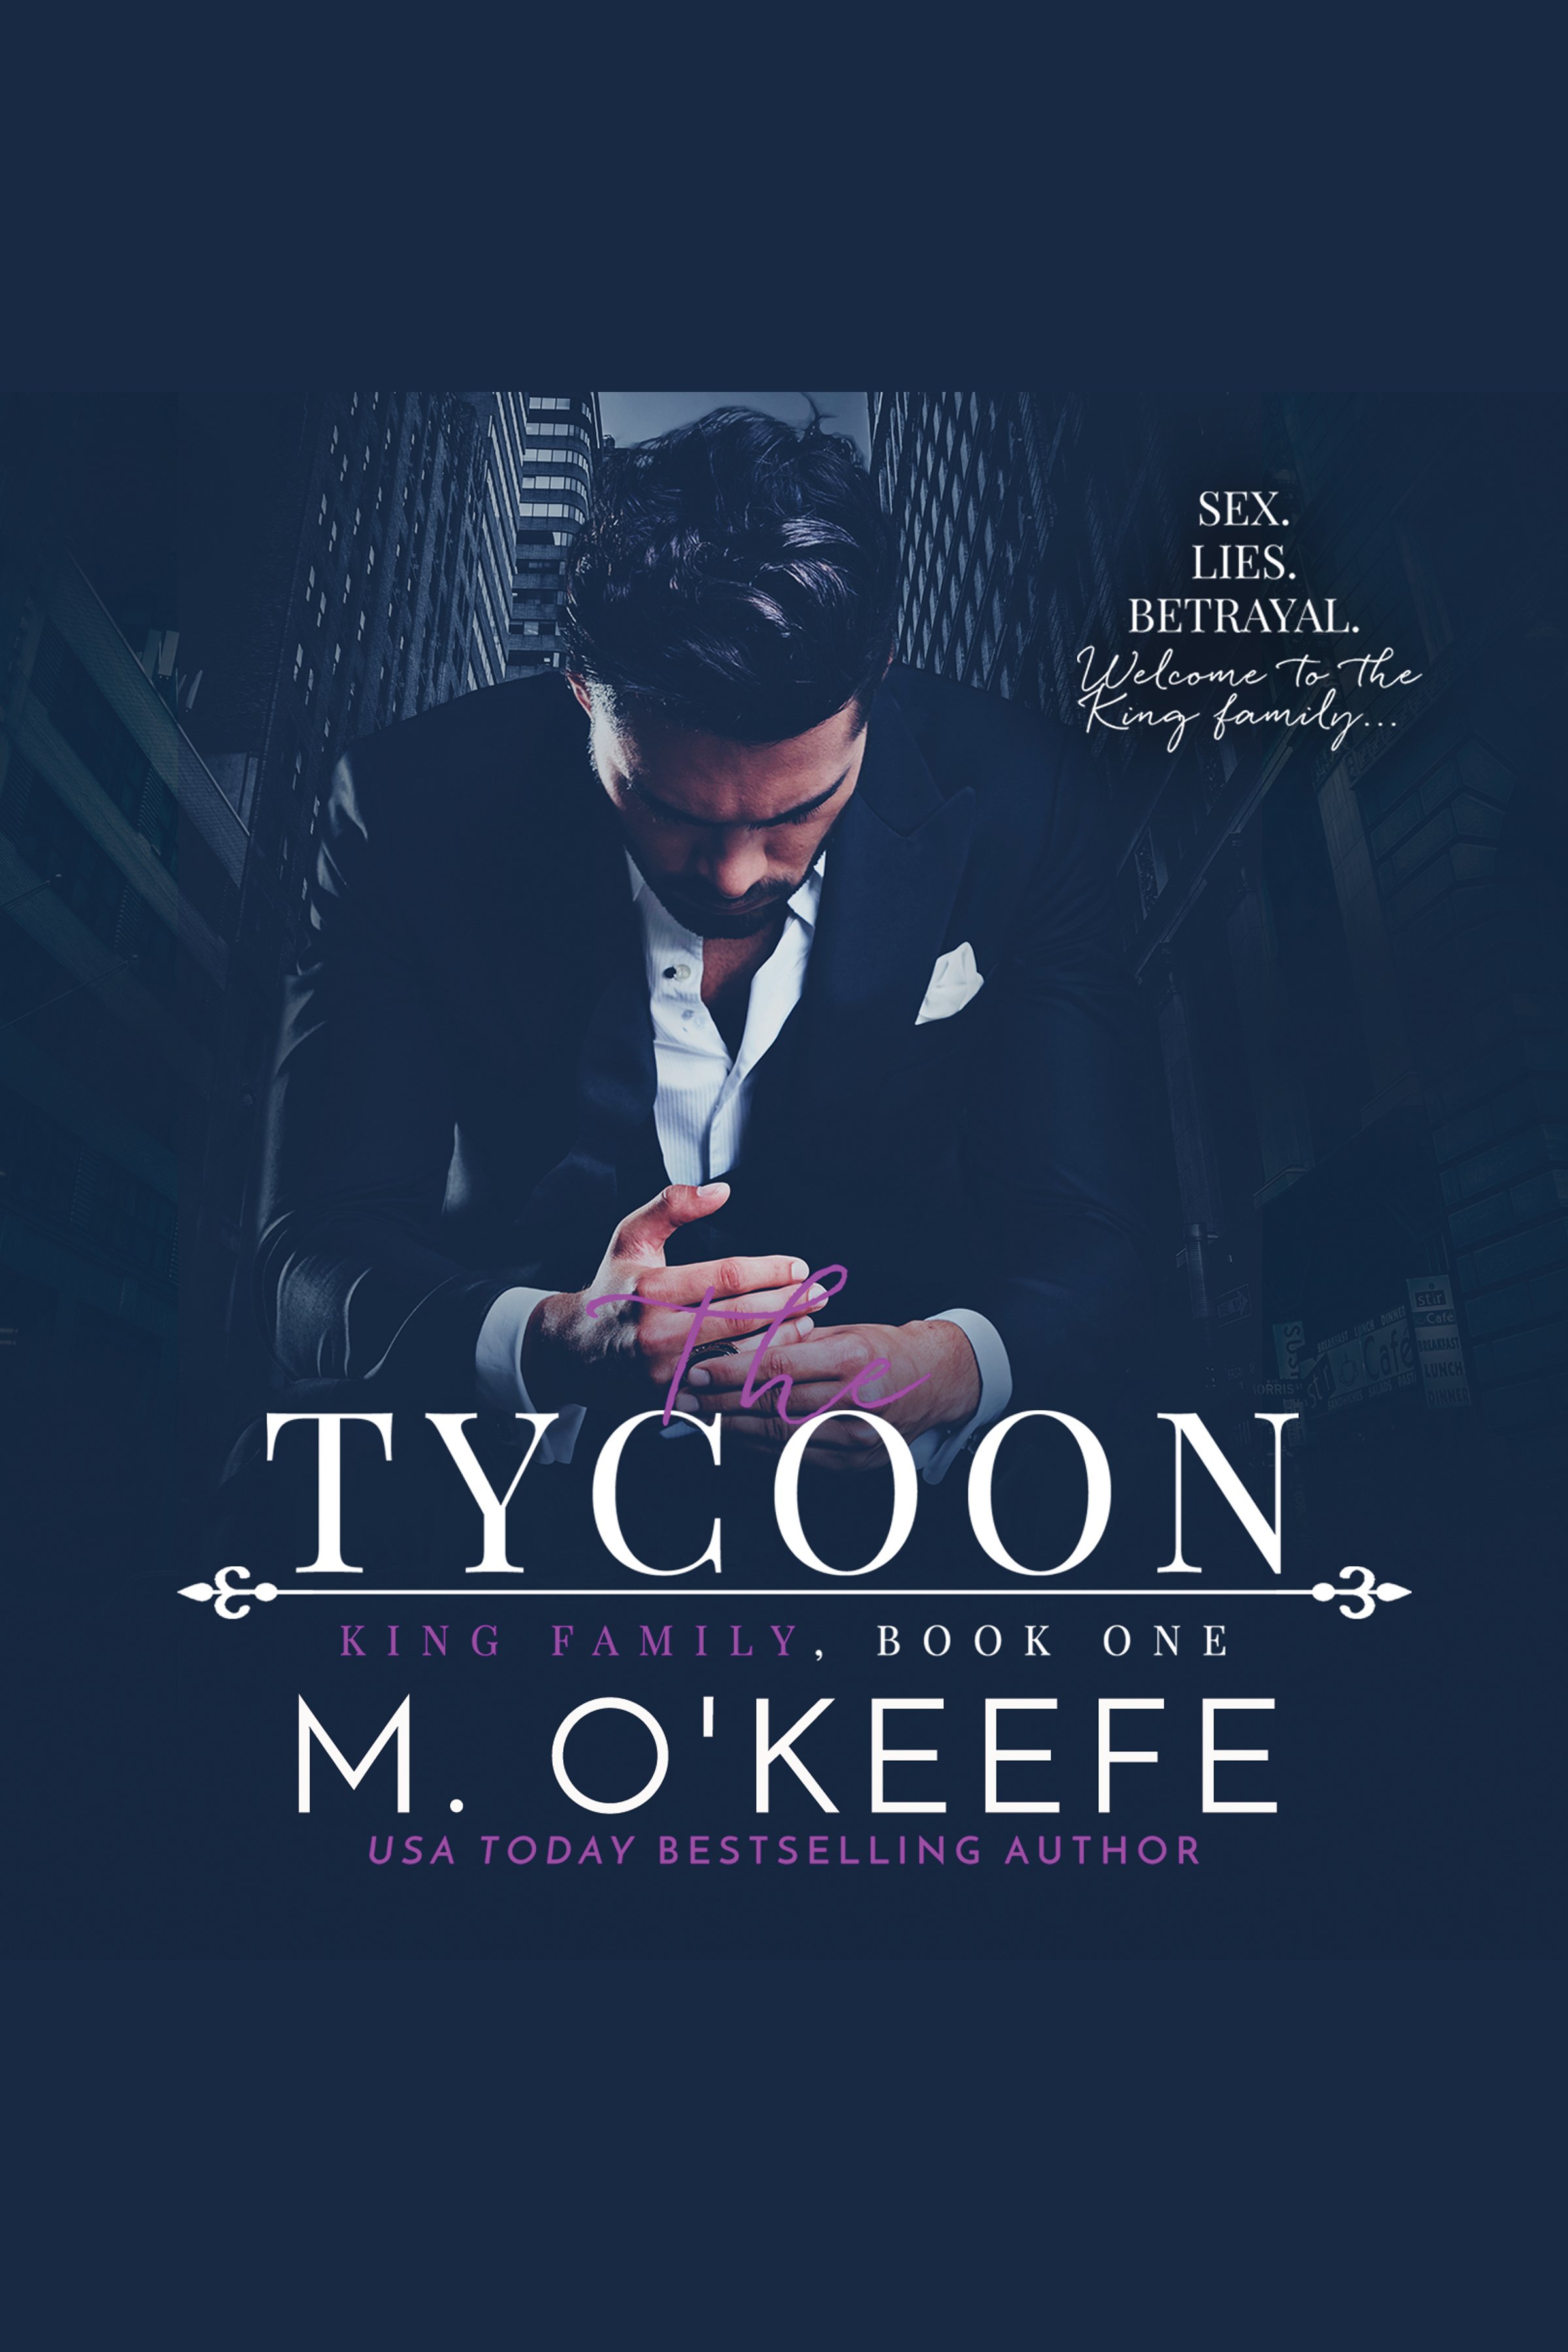 The tycoon cover image